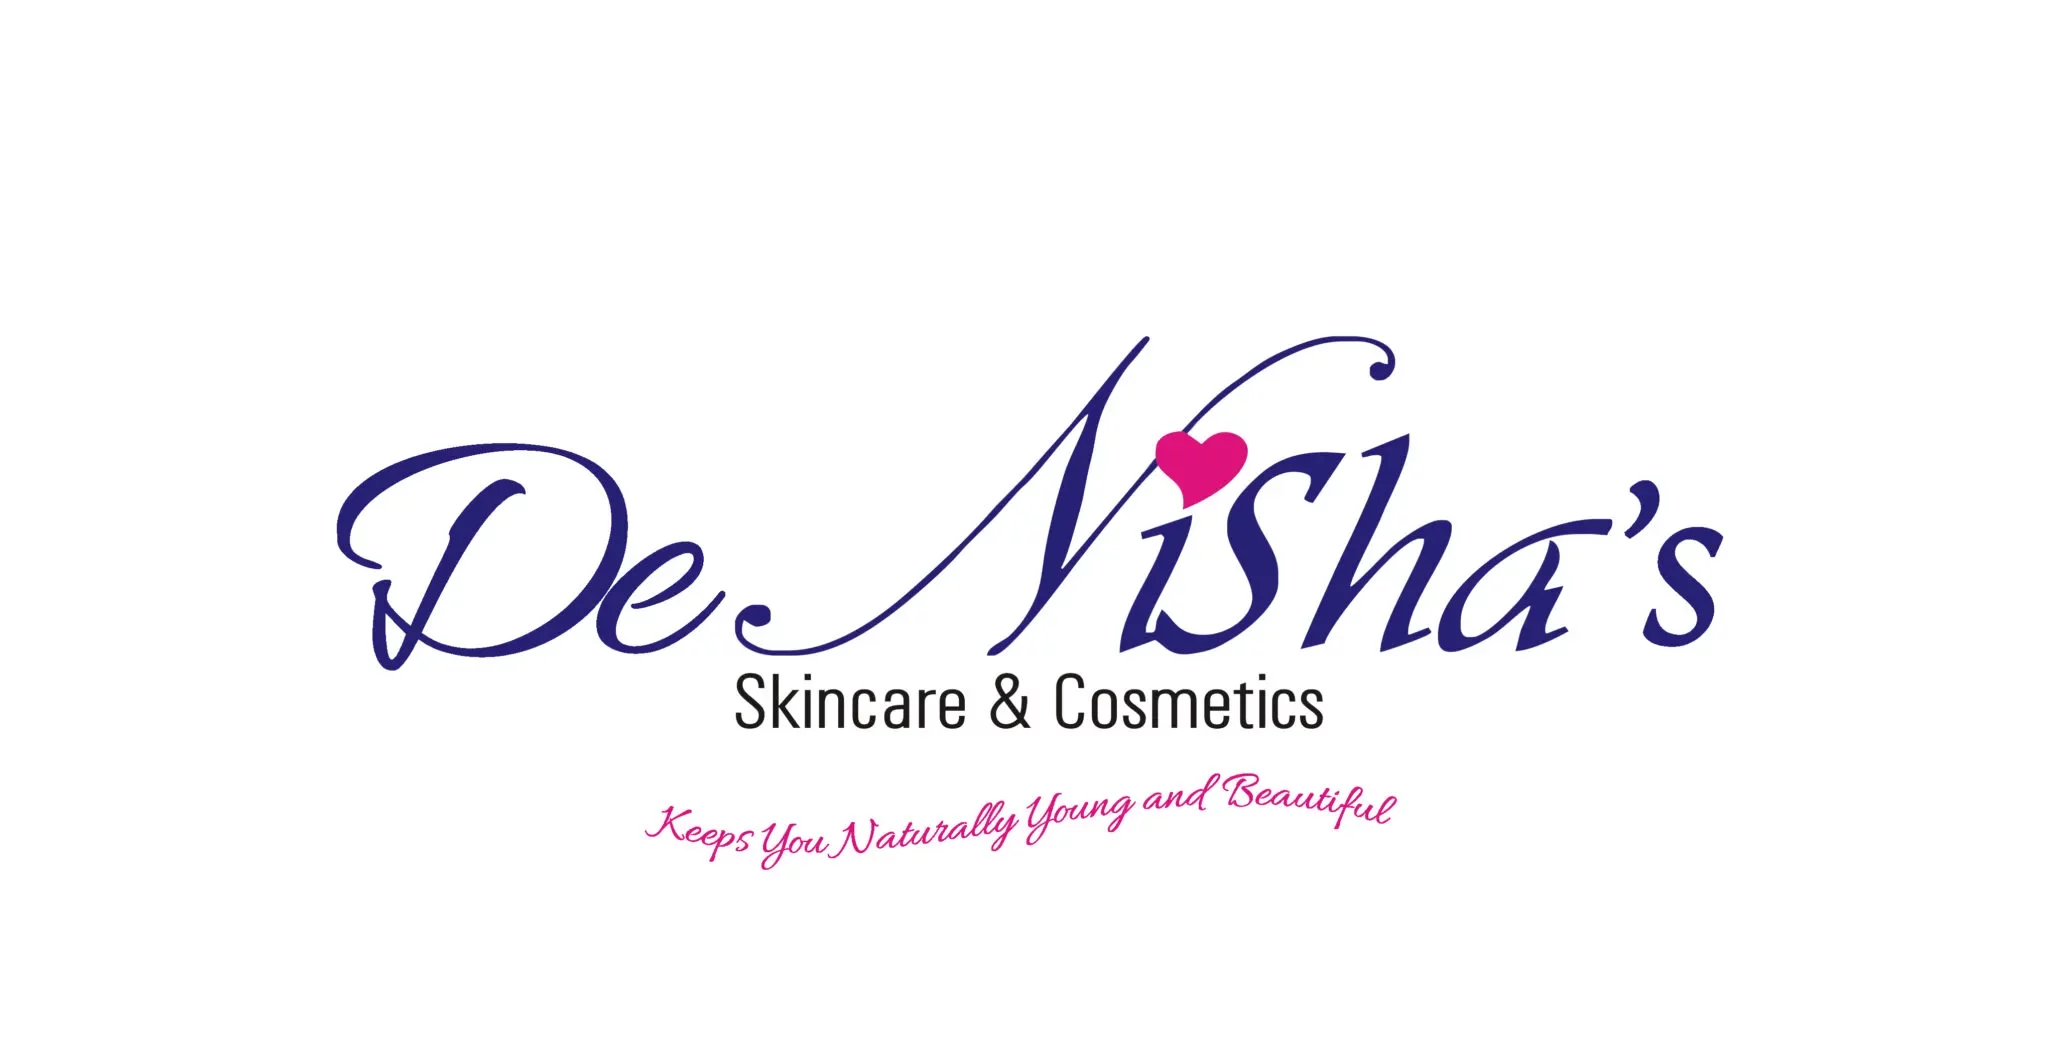 Do Nhe

Skincare &amp; Cosmetics

Keeps You Naturally Young and Beautif,
2 Z (2